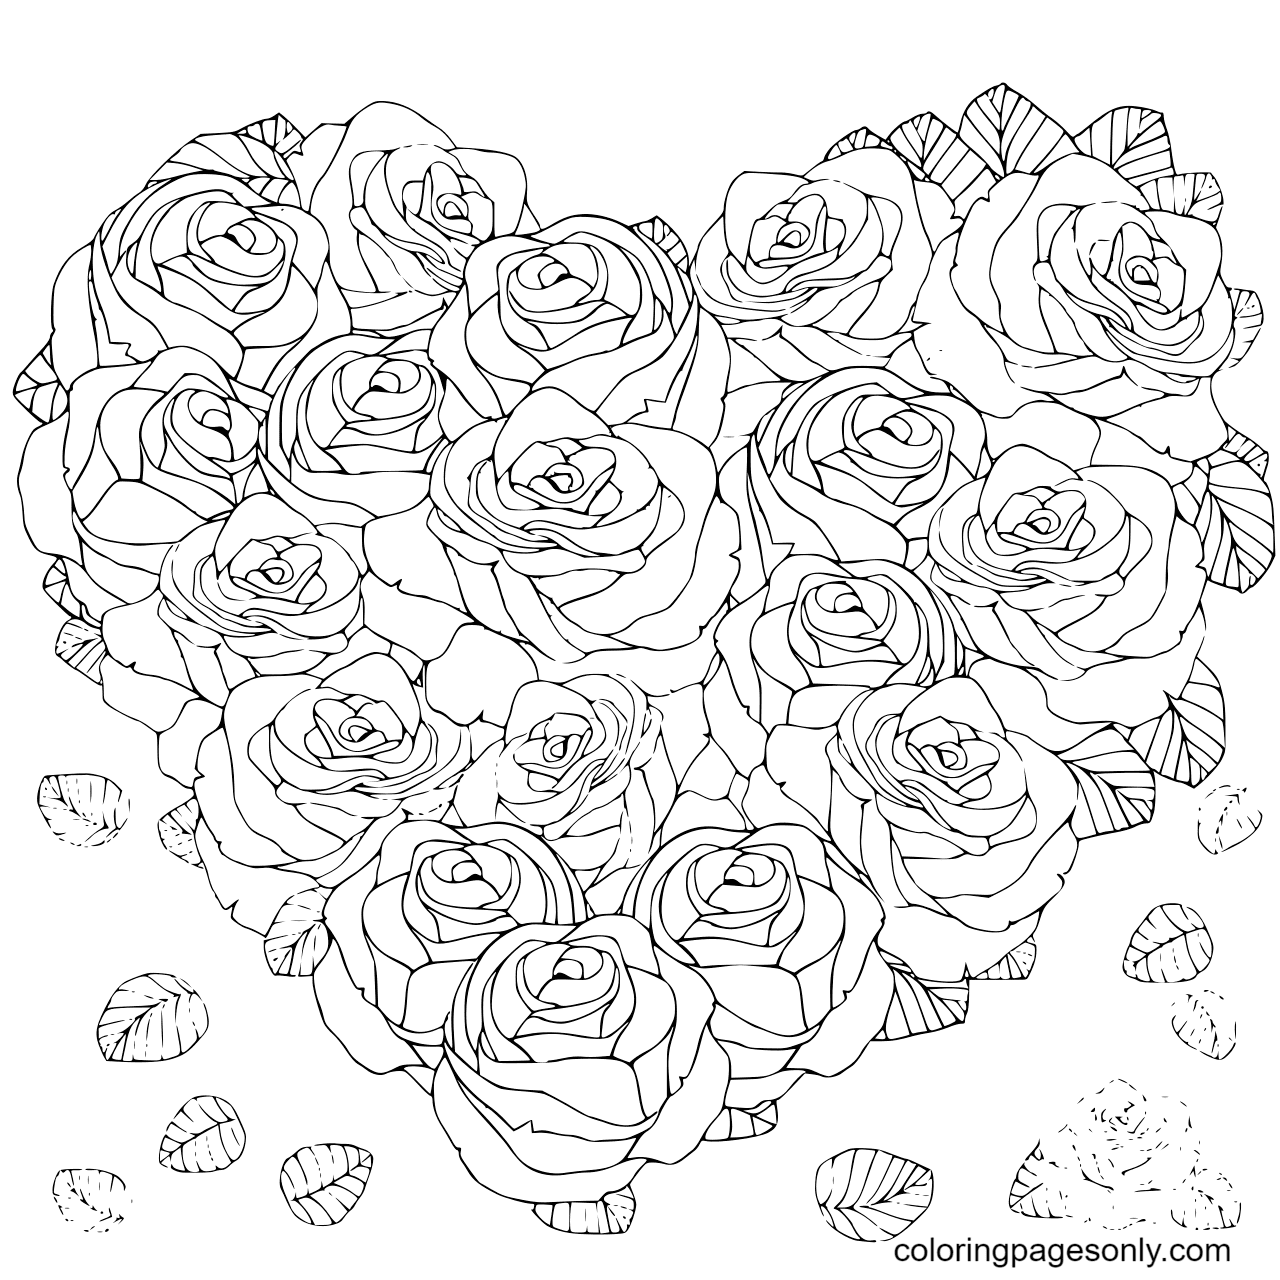 Beautiful Heart Made with Roses Coloring Page